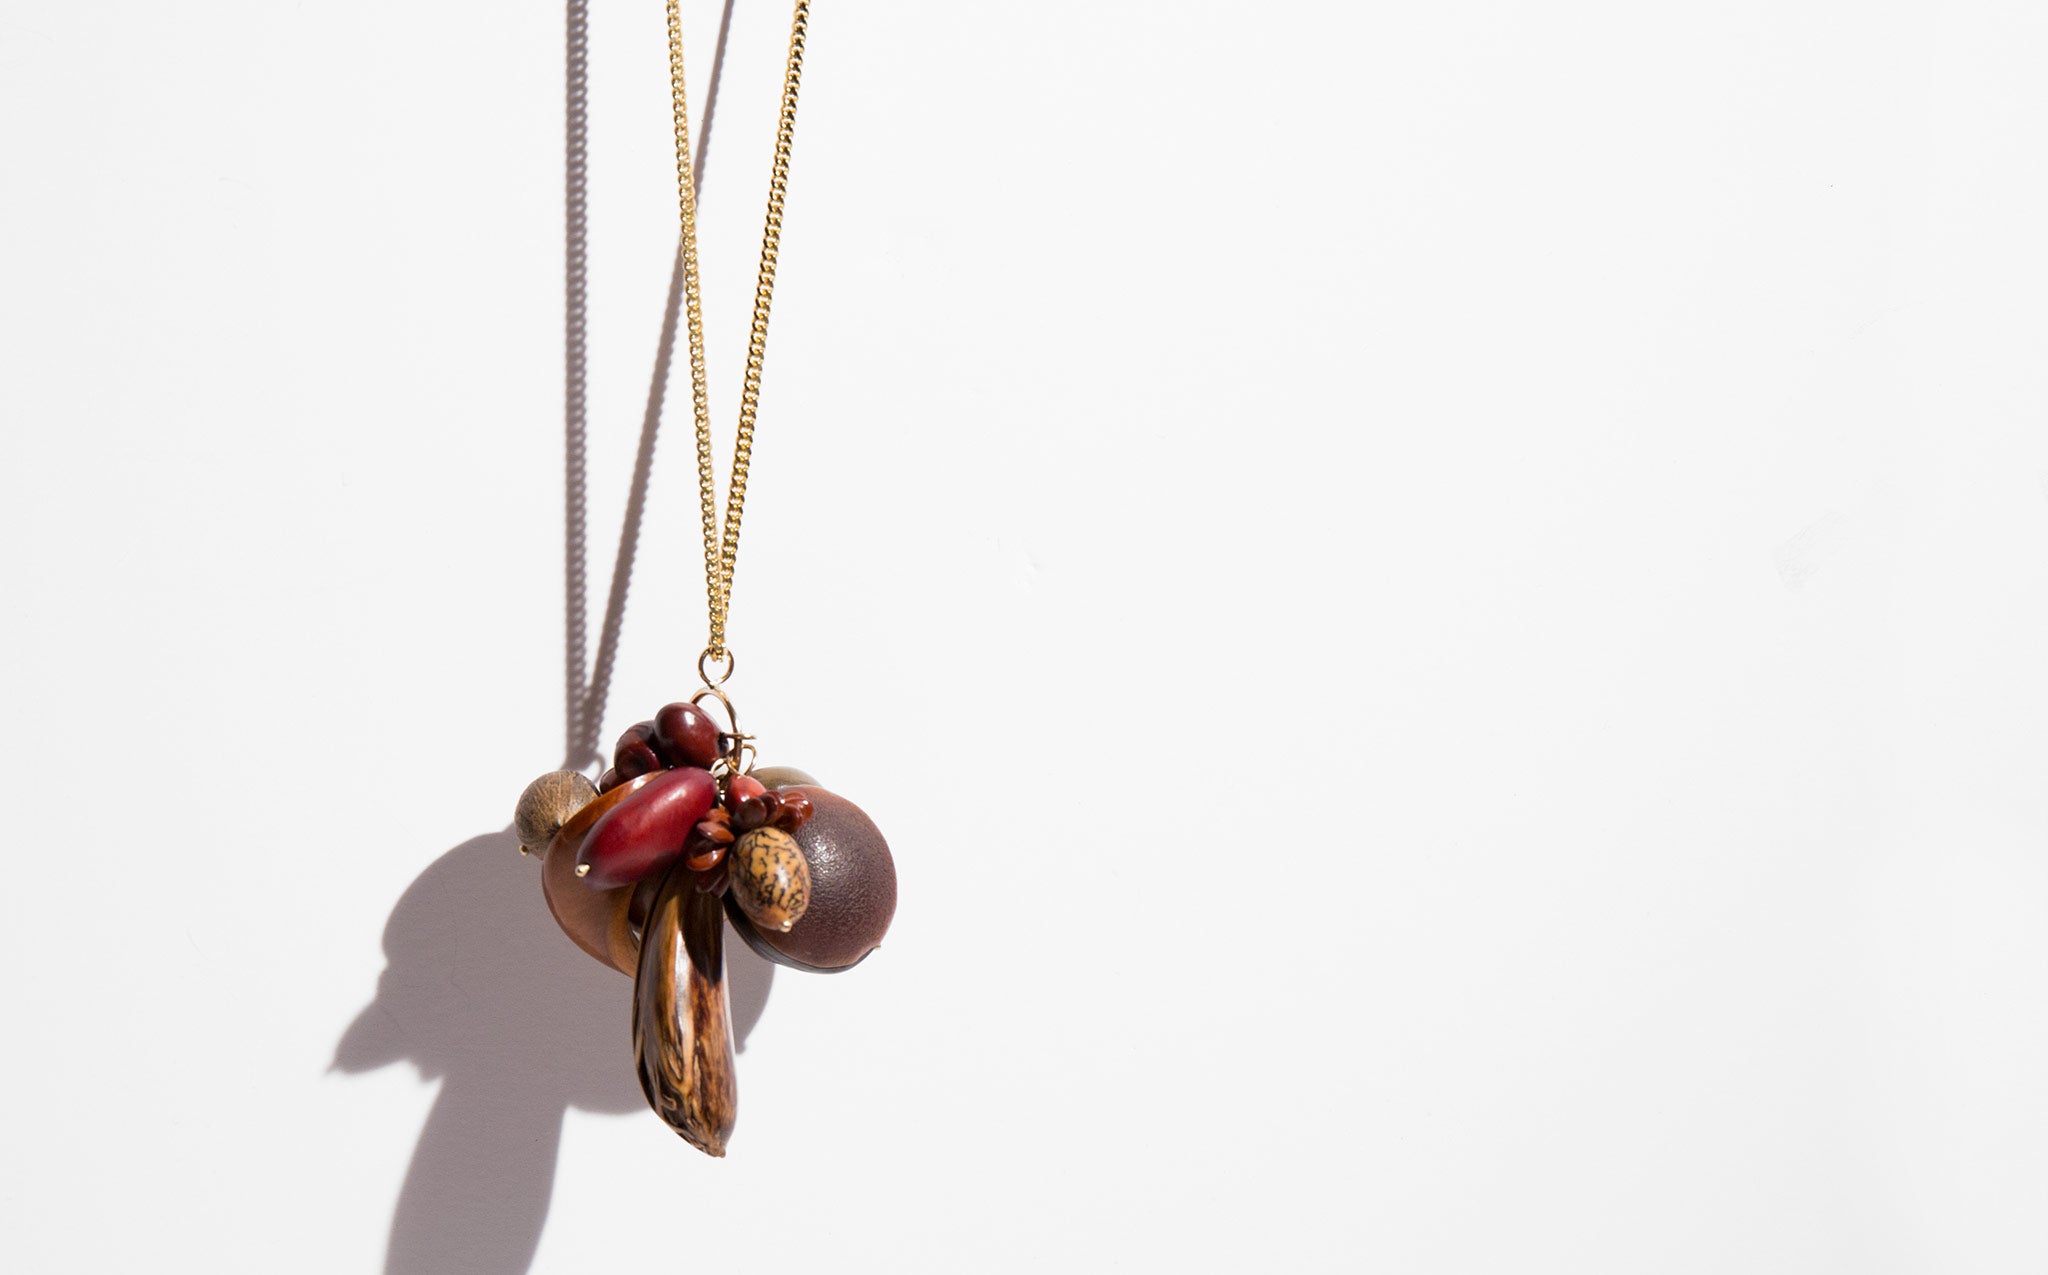 Driftseed Necklace